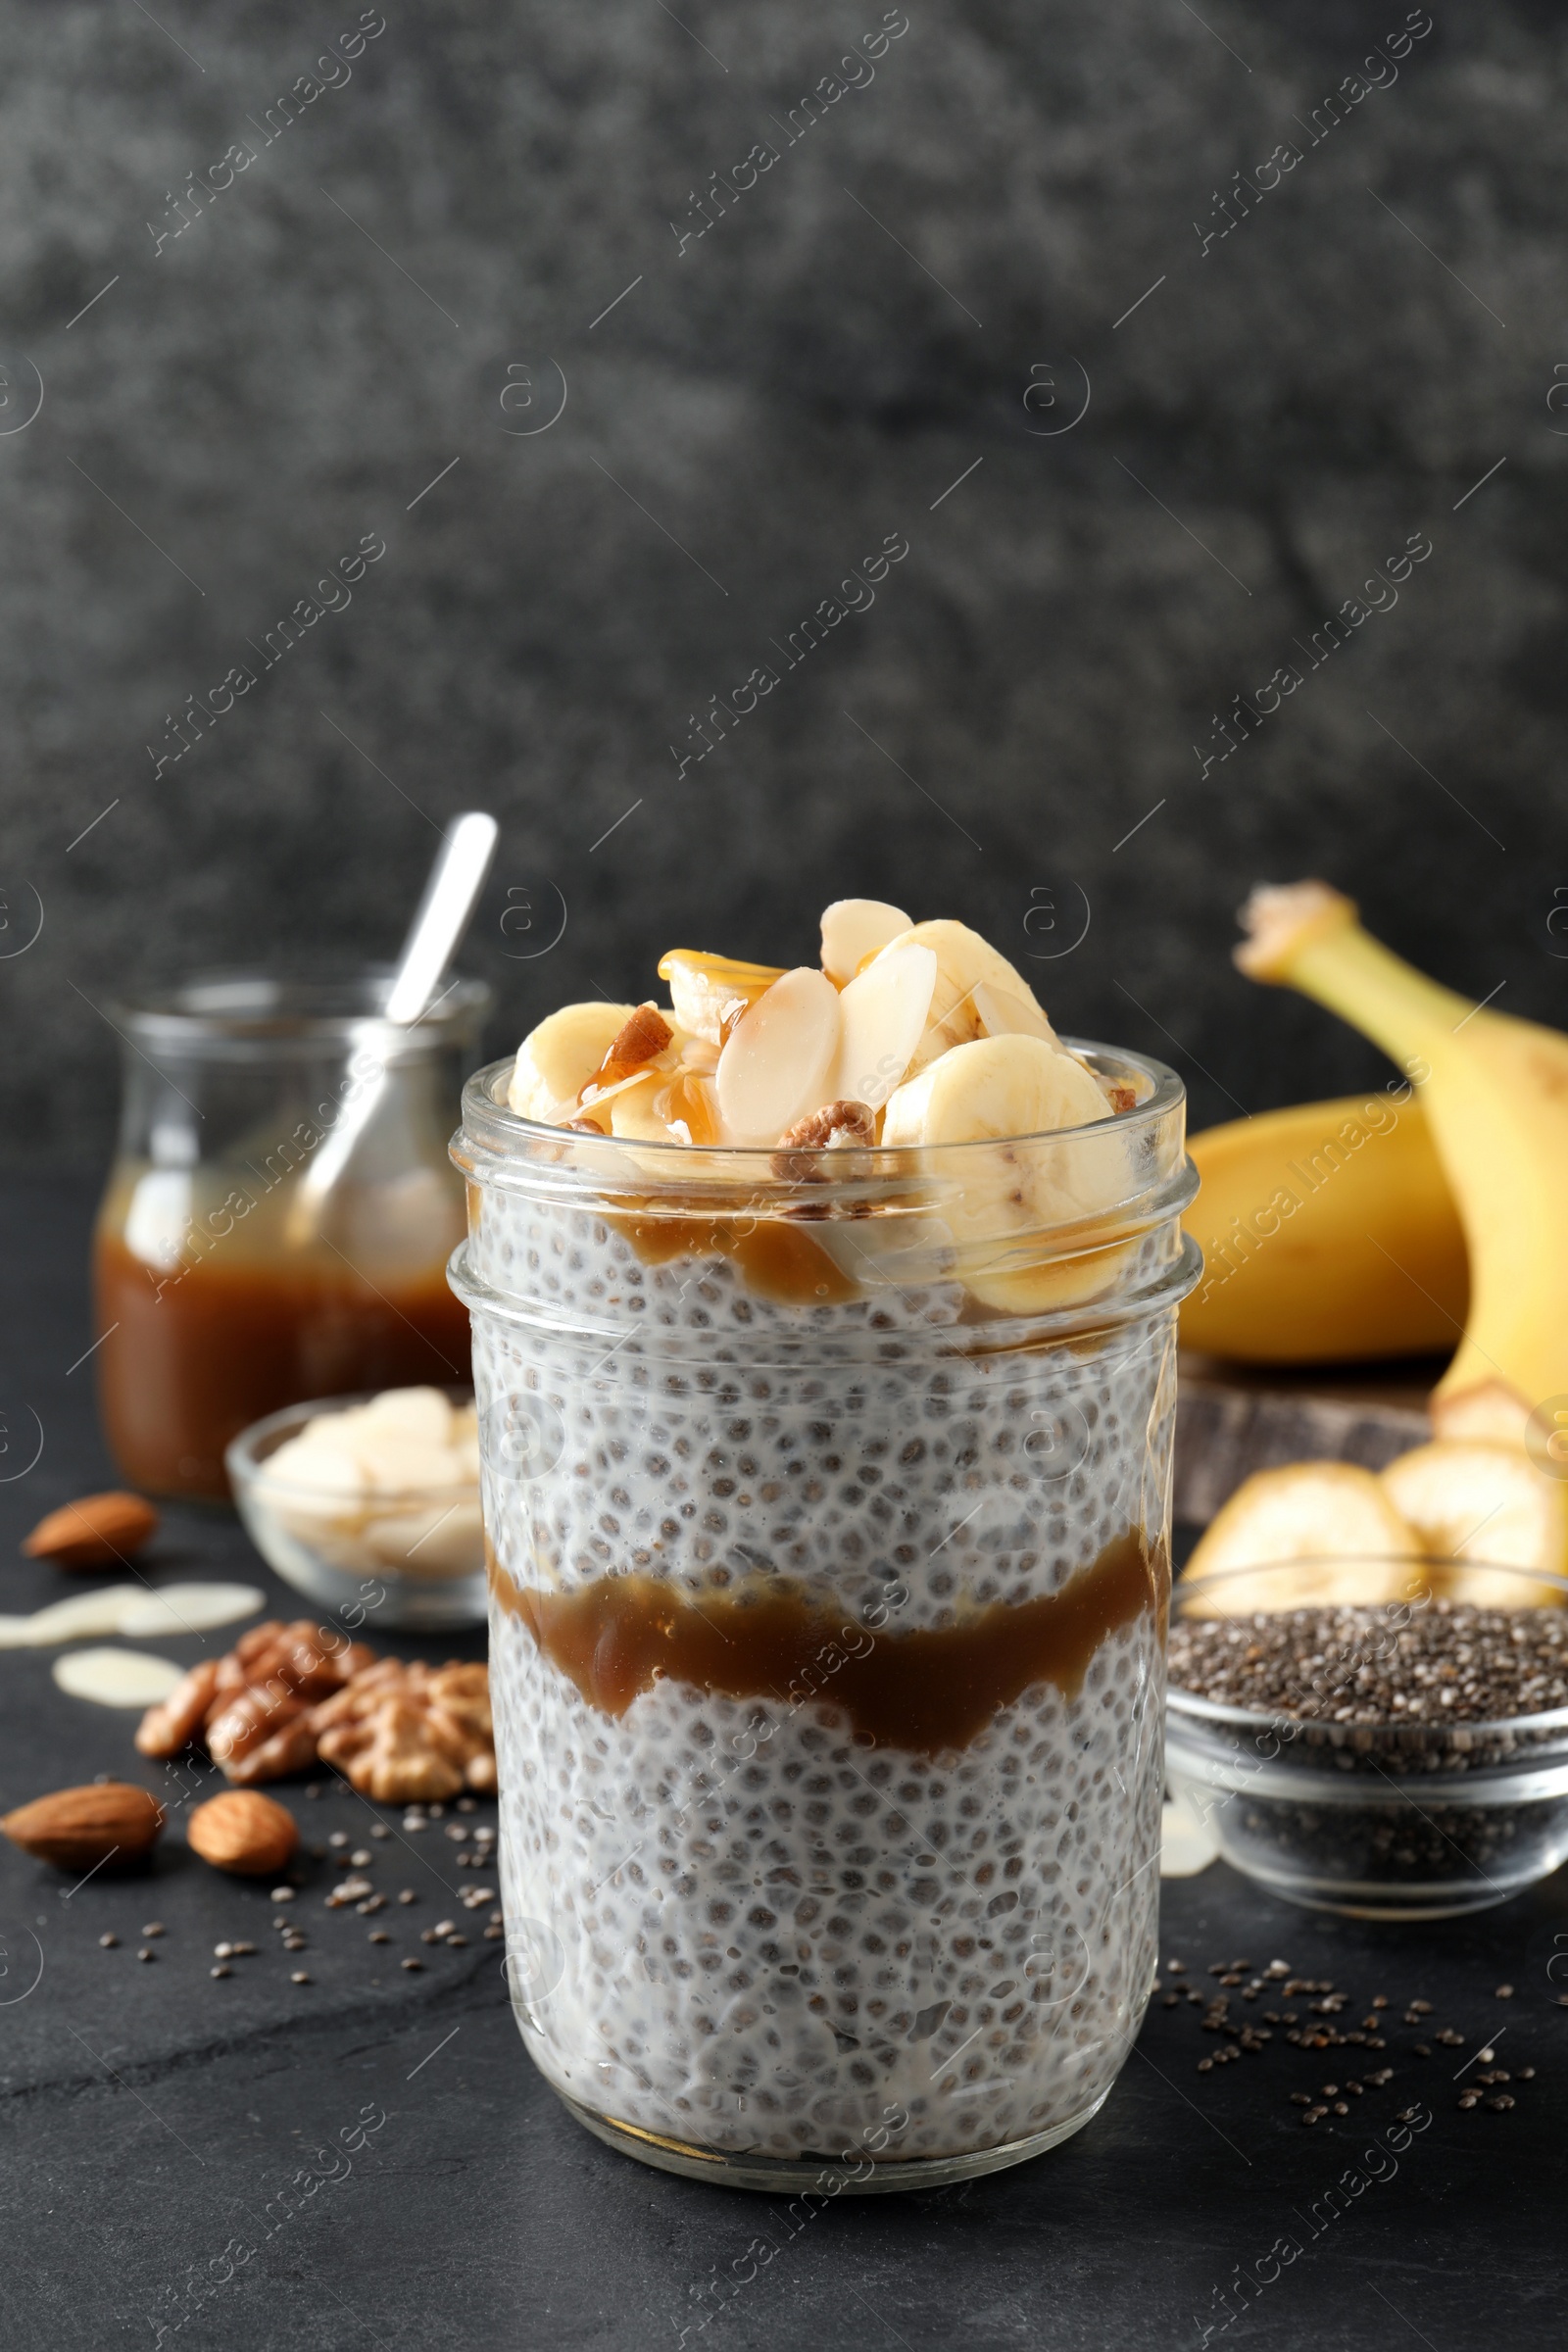 Photo of Delicious chia pudding with banana, walnuts and caramel sauce on black table